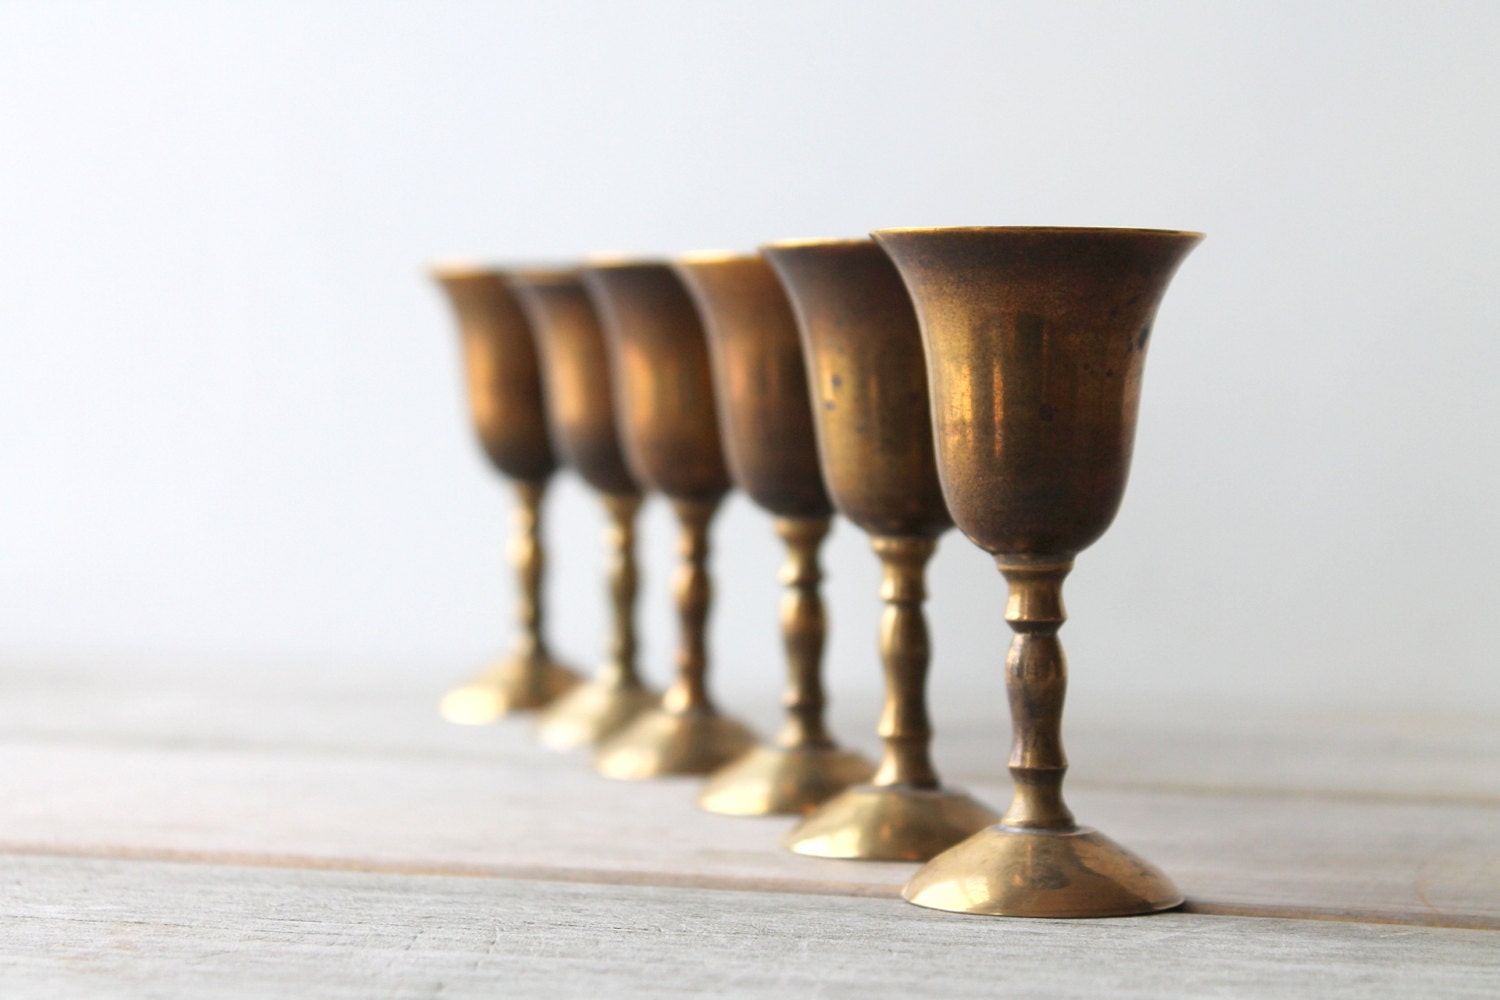 Vintage brass cordial set / small goblets / global home decor / ethnic / tribal / eclectic home / gift idea / rustic glam / regency - WhiteDogVintage